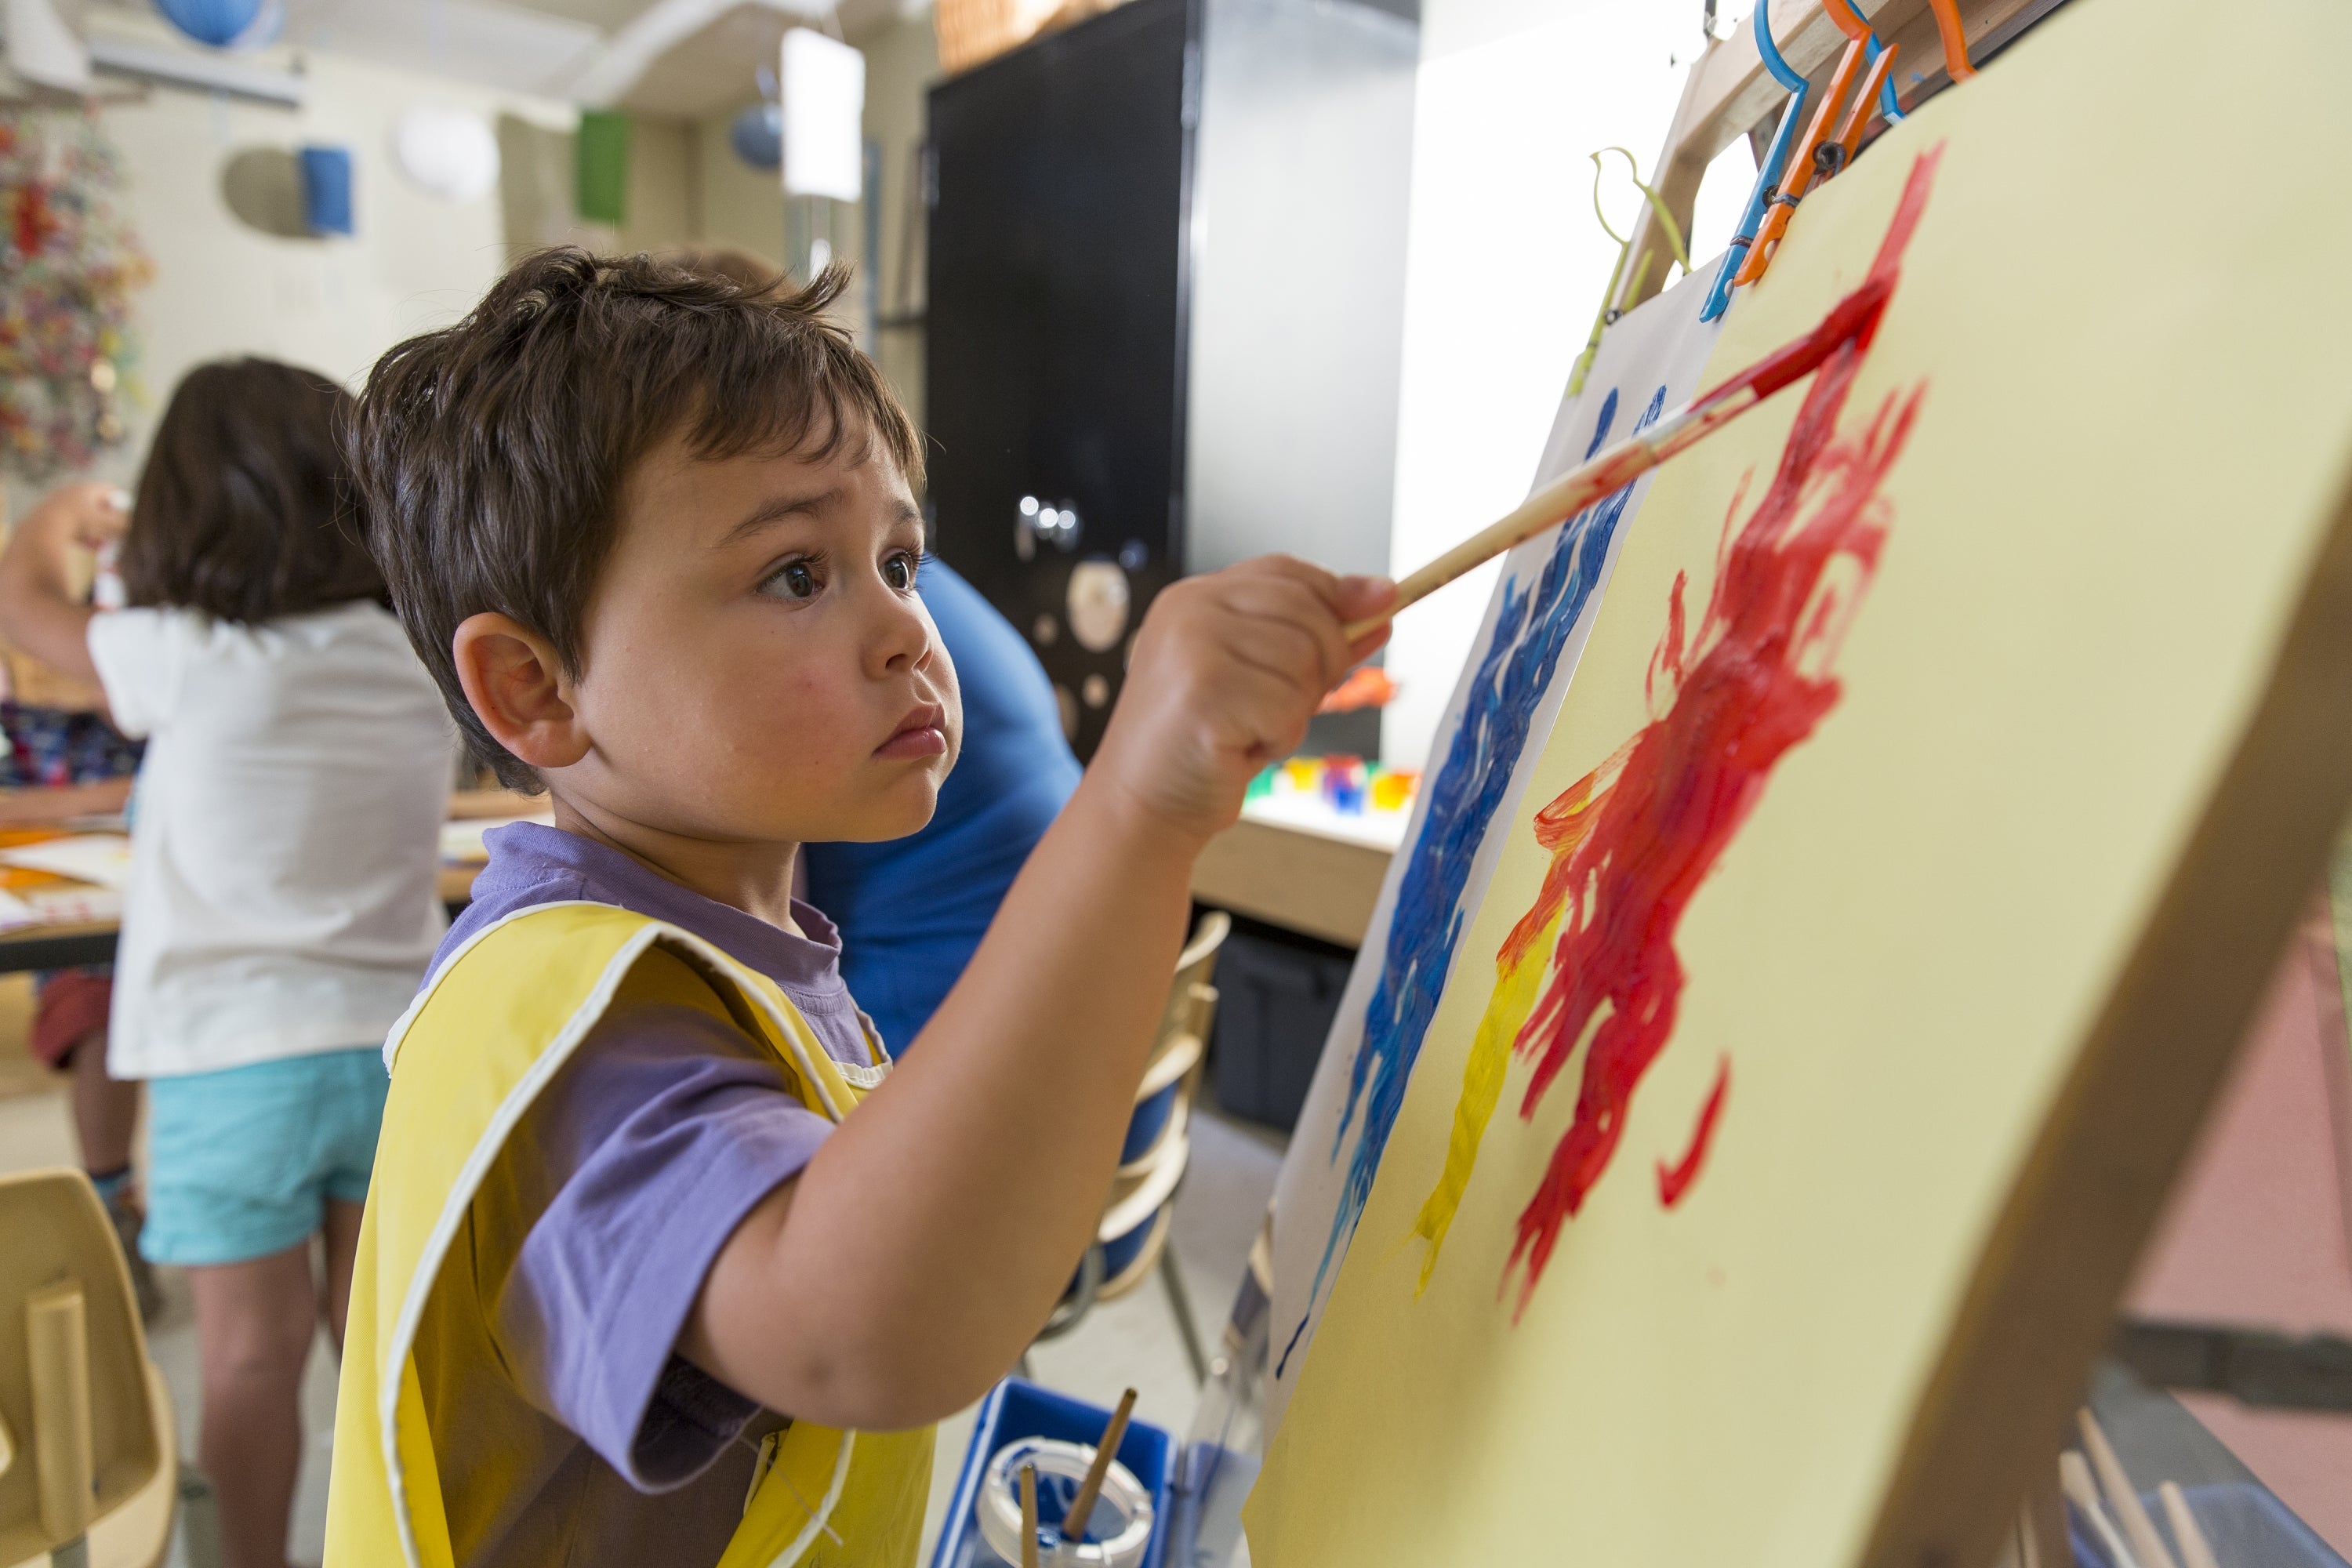 A child painting.